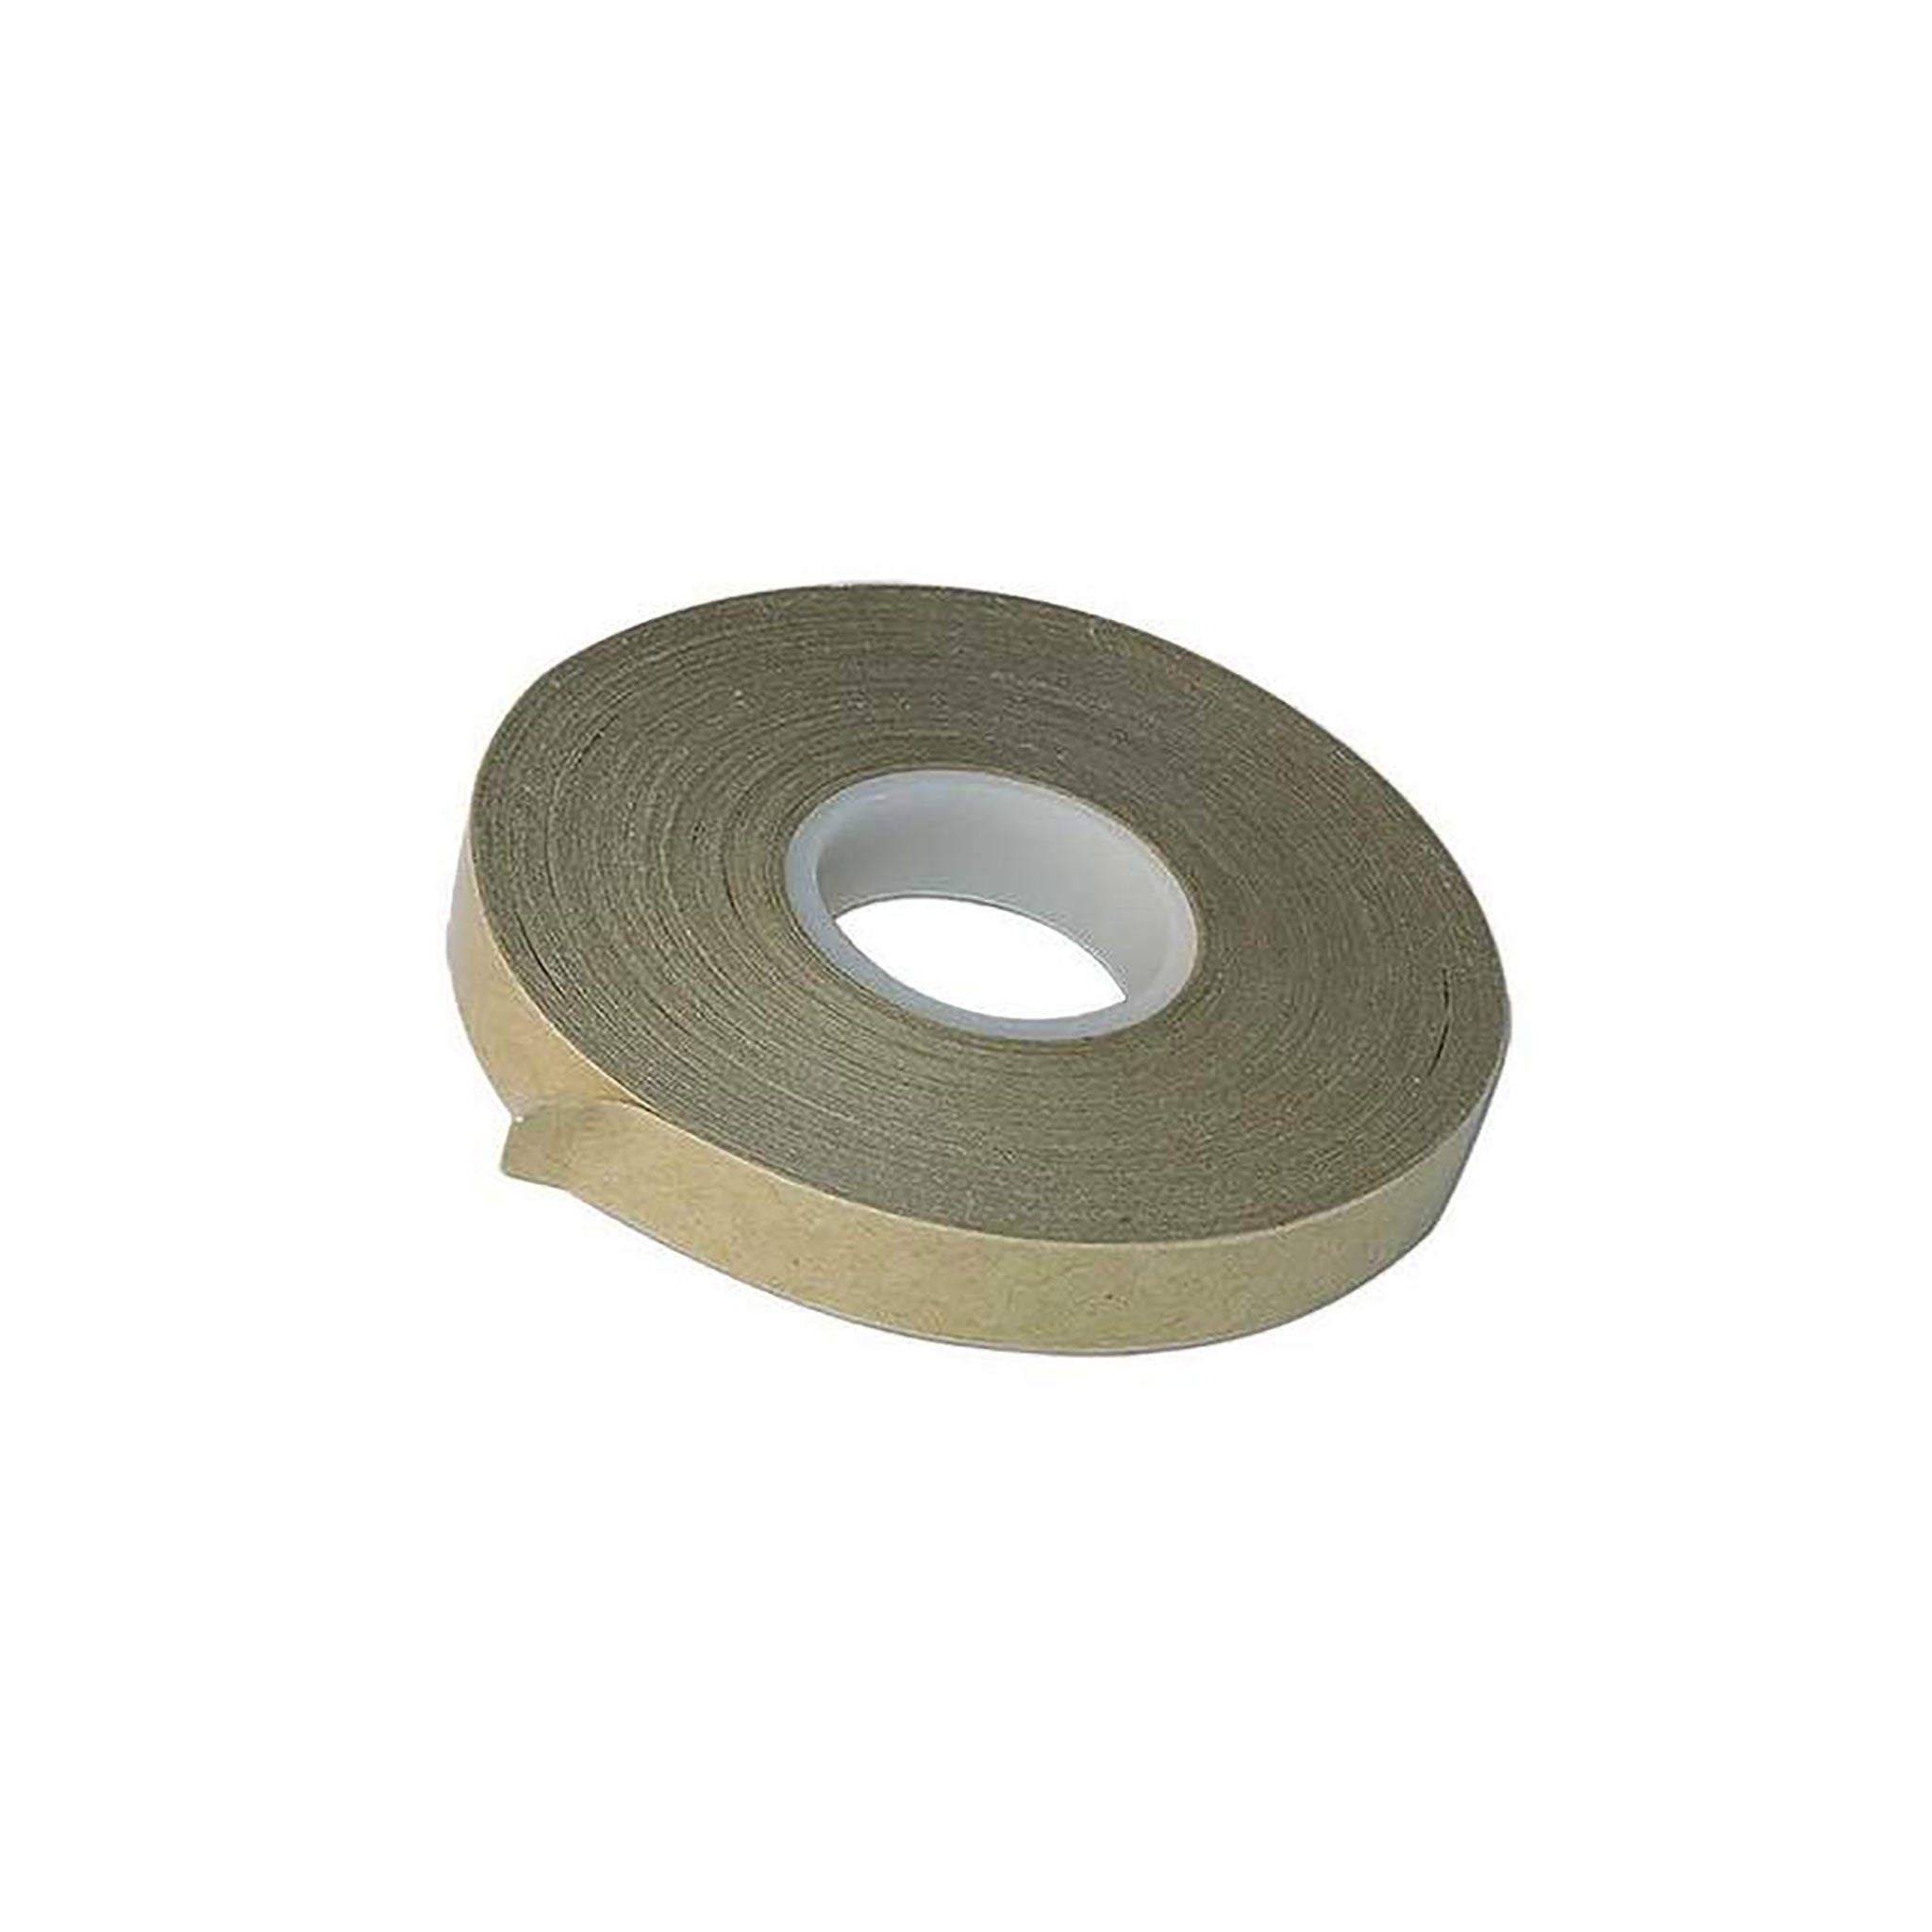 10mm Tanner's Bond Adhesive Tape - Repositionable from Identity Leathercraft